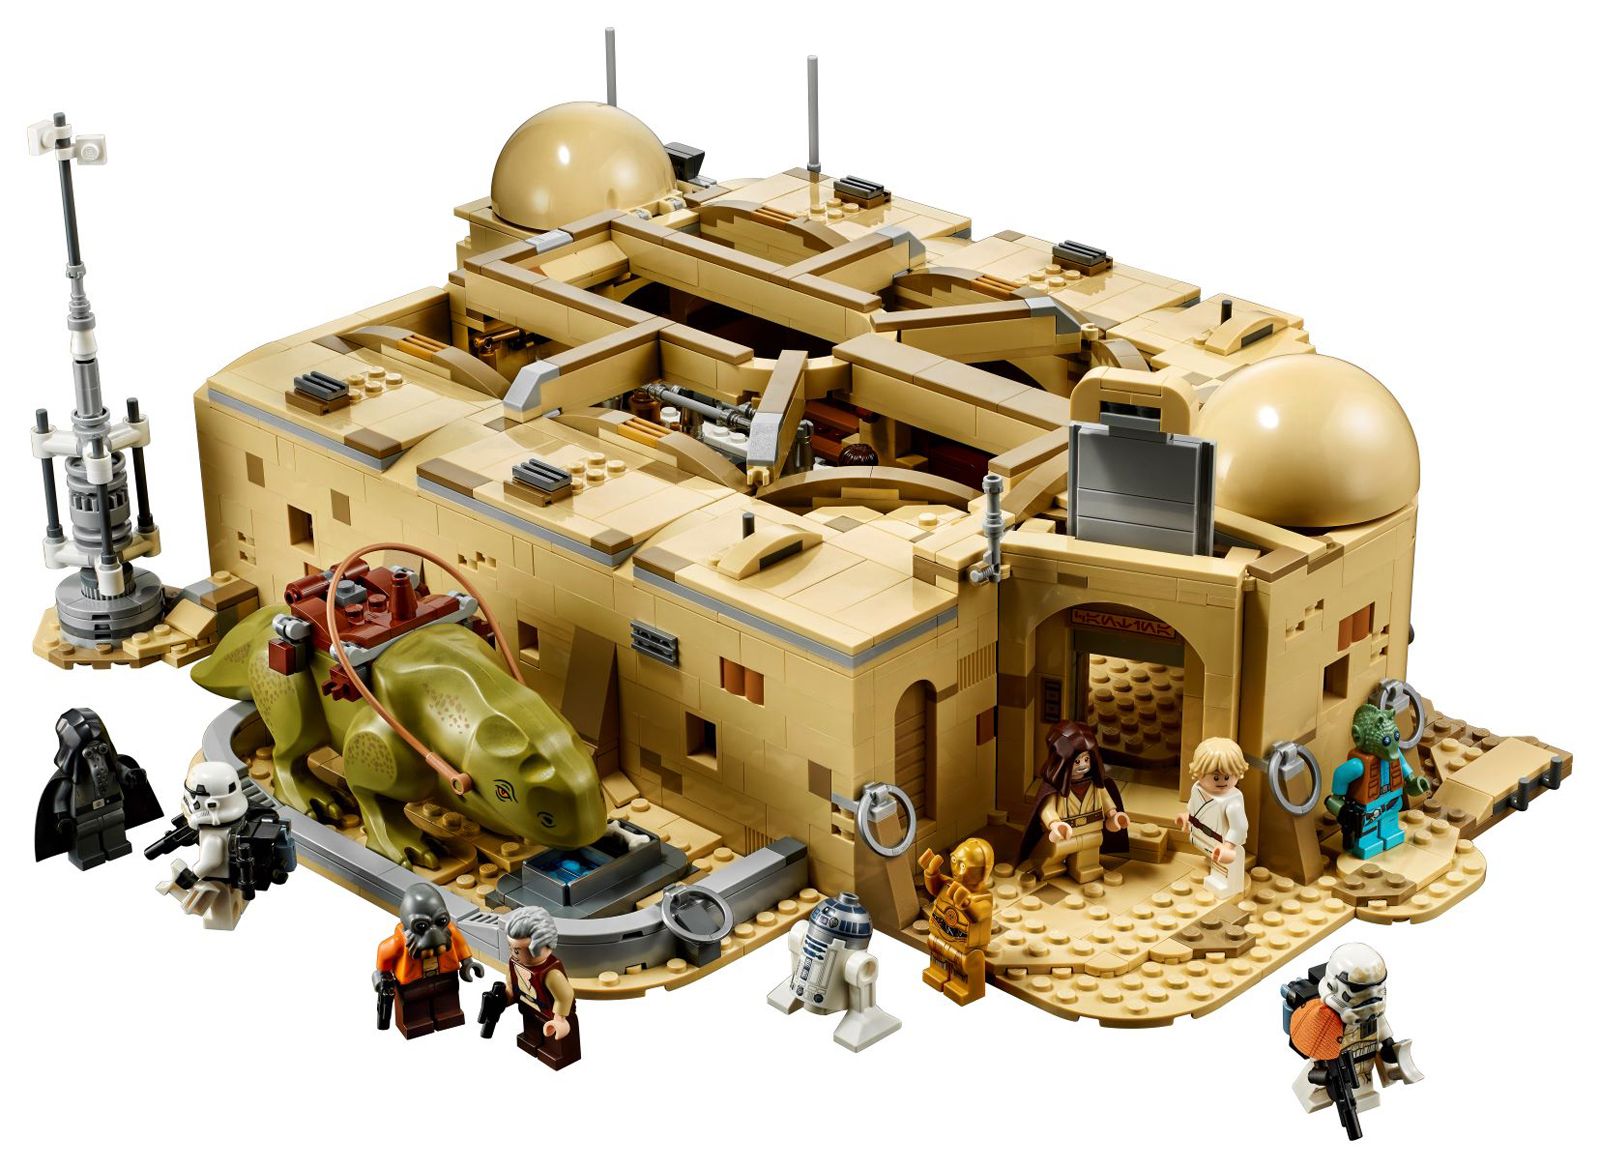 Lego's latest Star Wars set is an epic recreation of the Mos Eisley Cantina photo 1